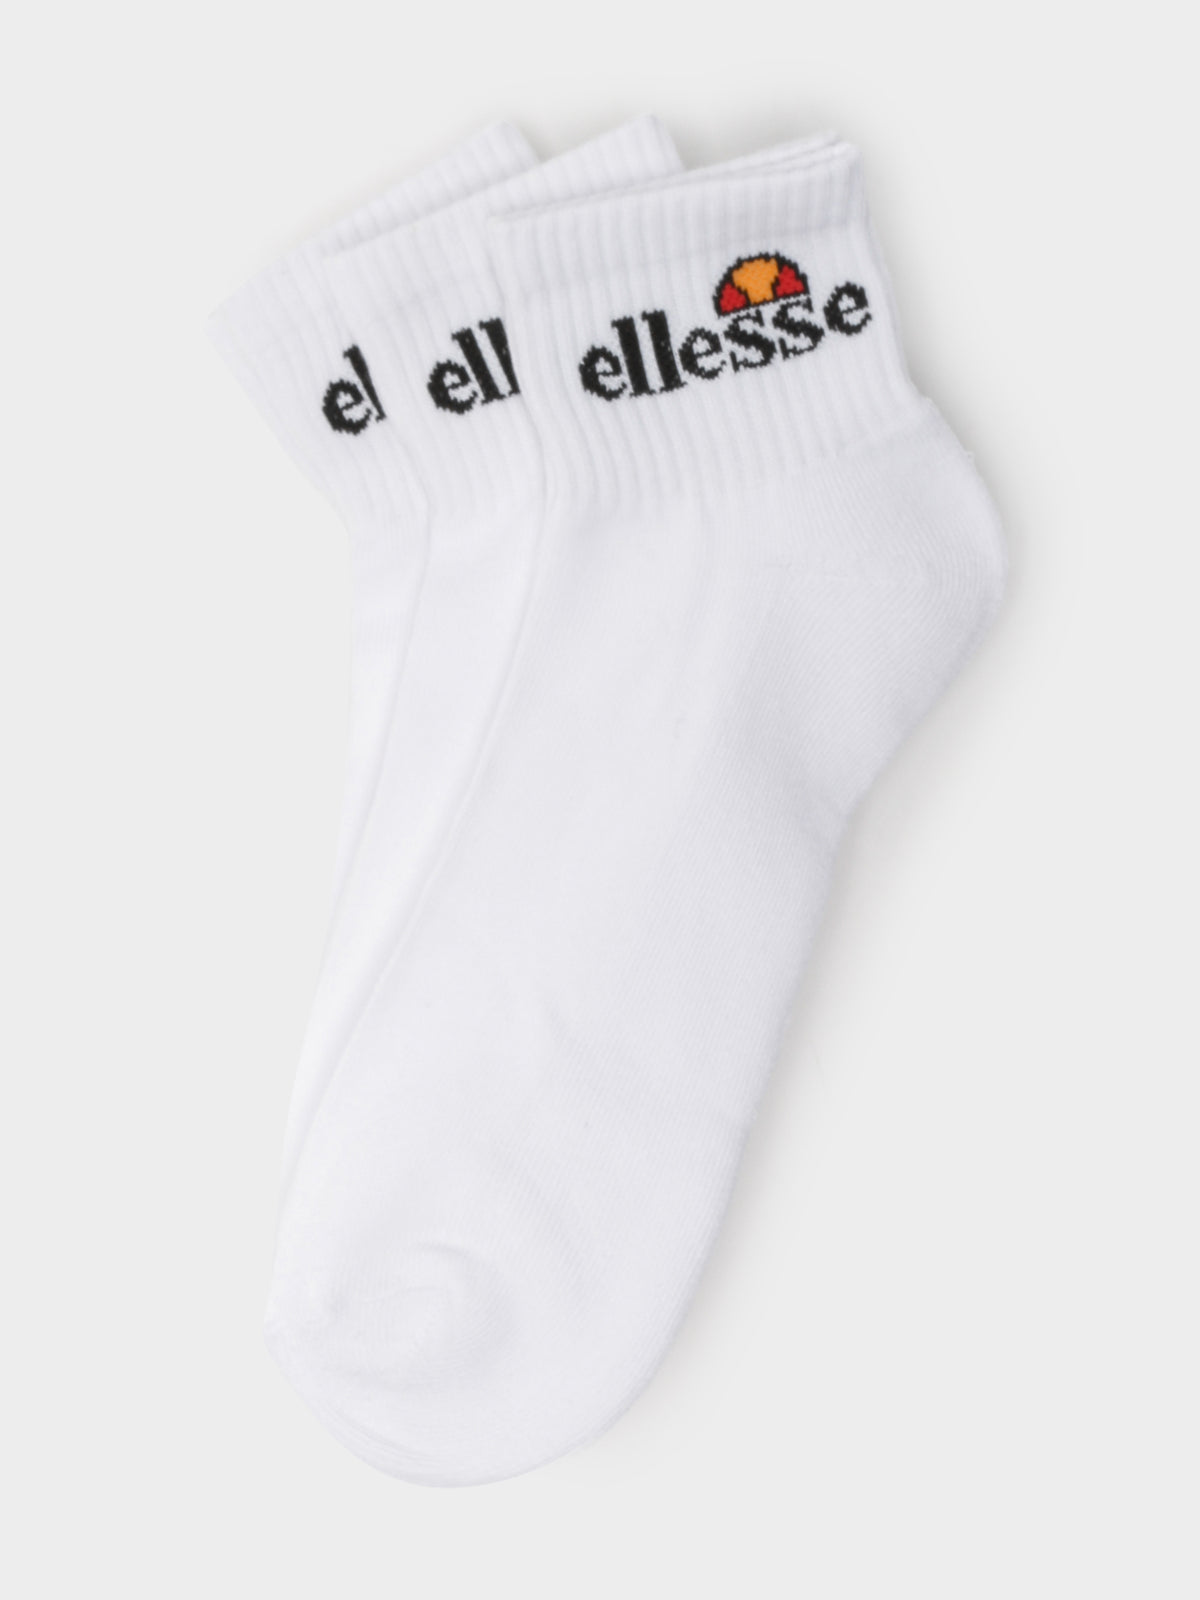 3 Pairs of Rallo Ankle Socks in White